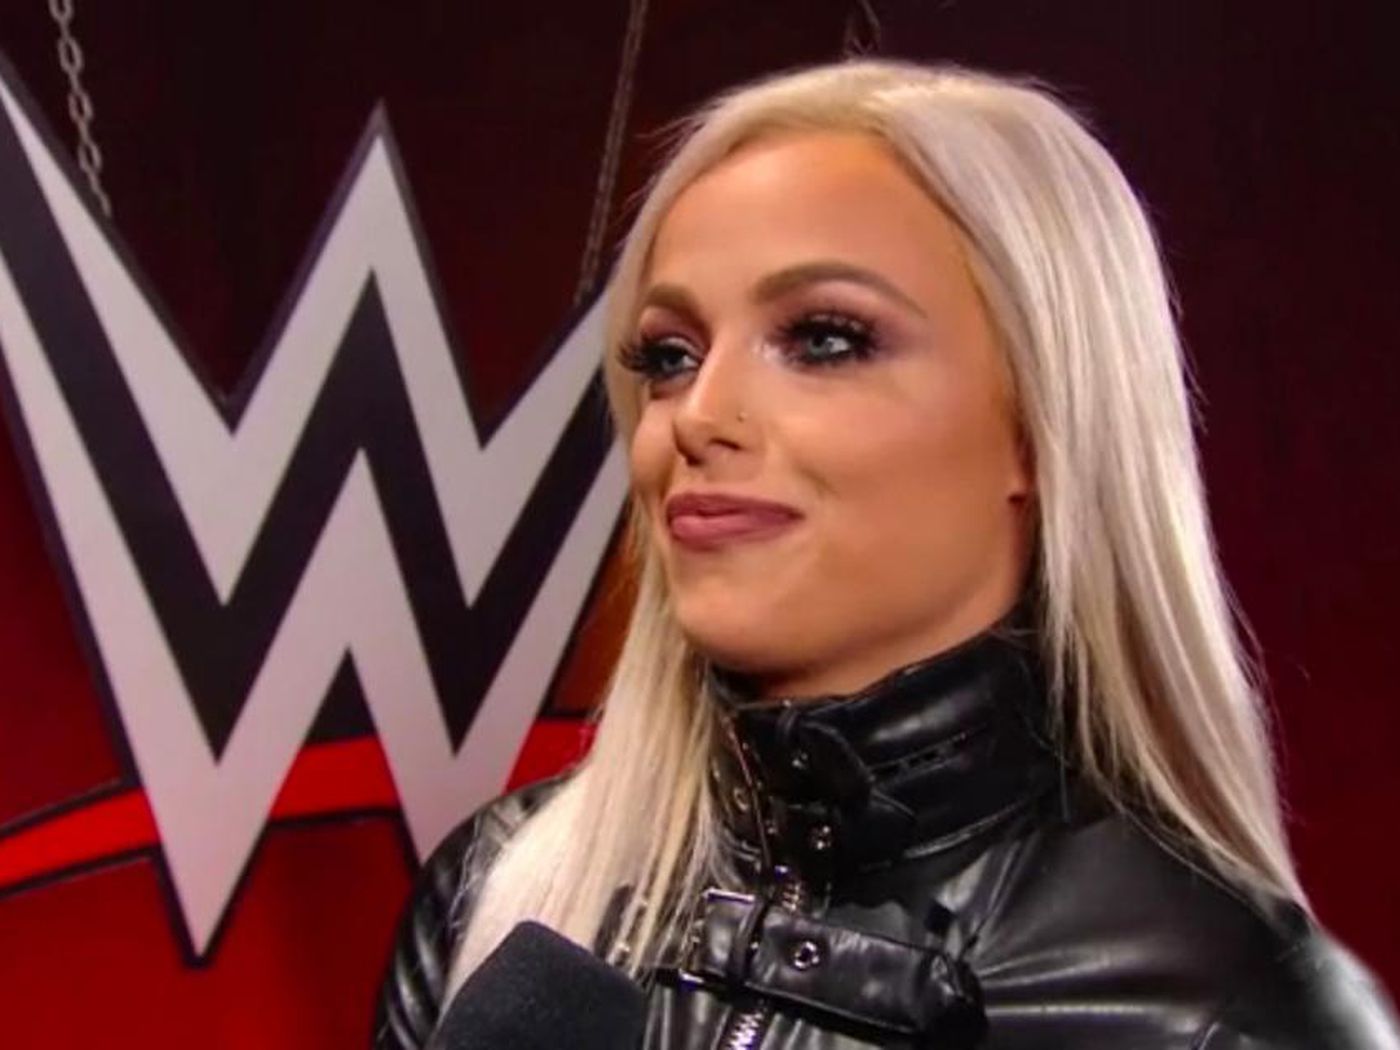 Liv Says it was Time for her Character to Evolve